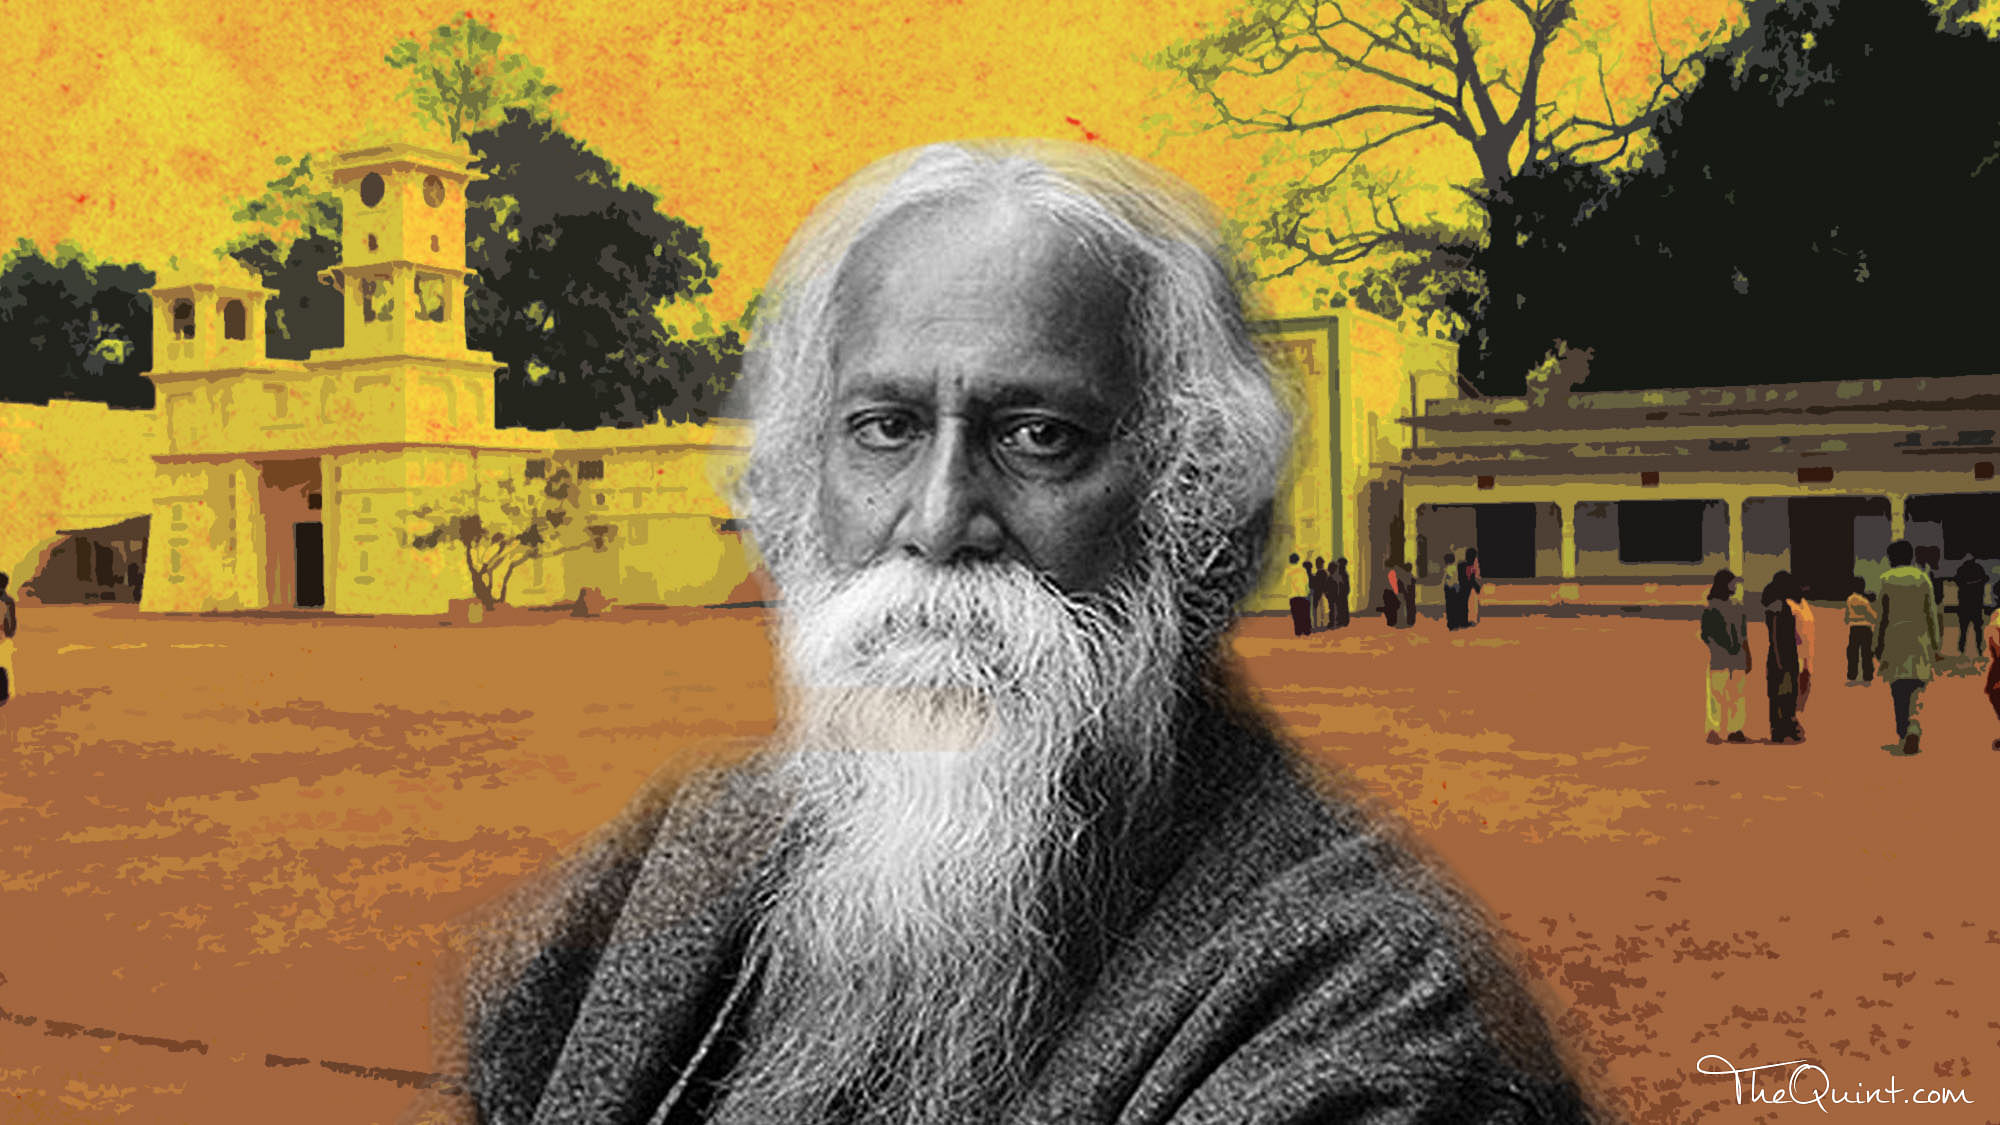 

Why did Tagore’s Visva Bharati, envisoned as global institution, turn out to be state-run centre of learning?